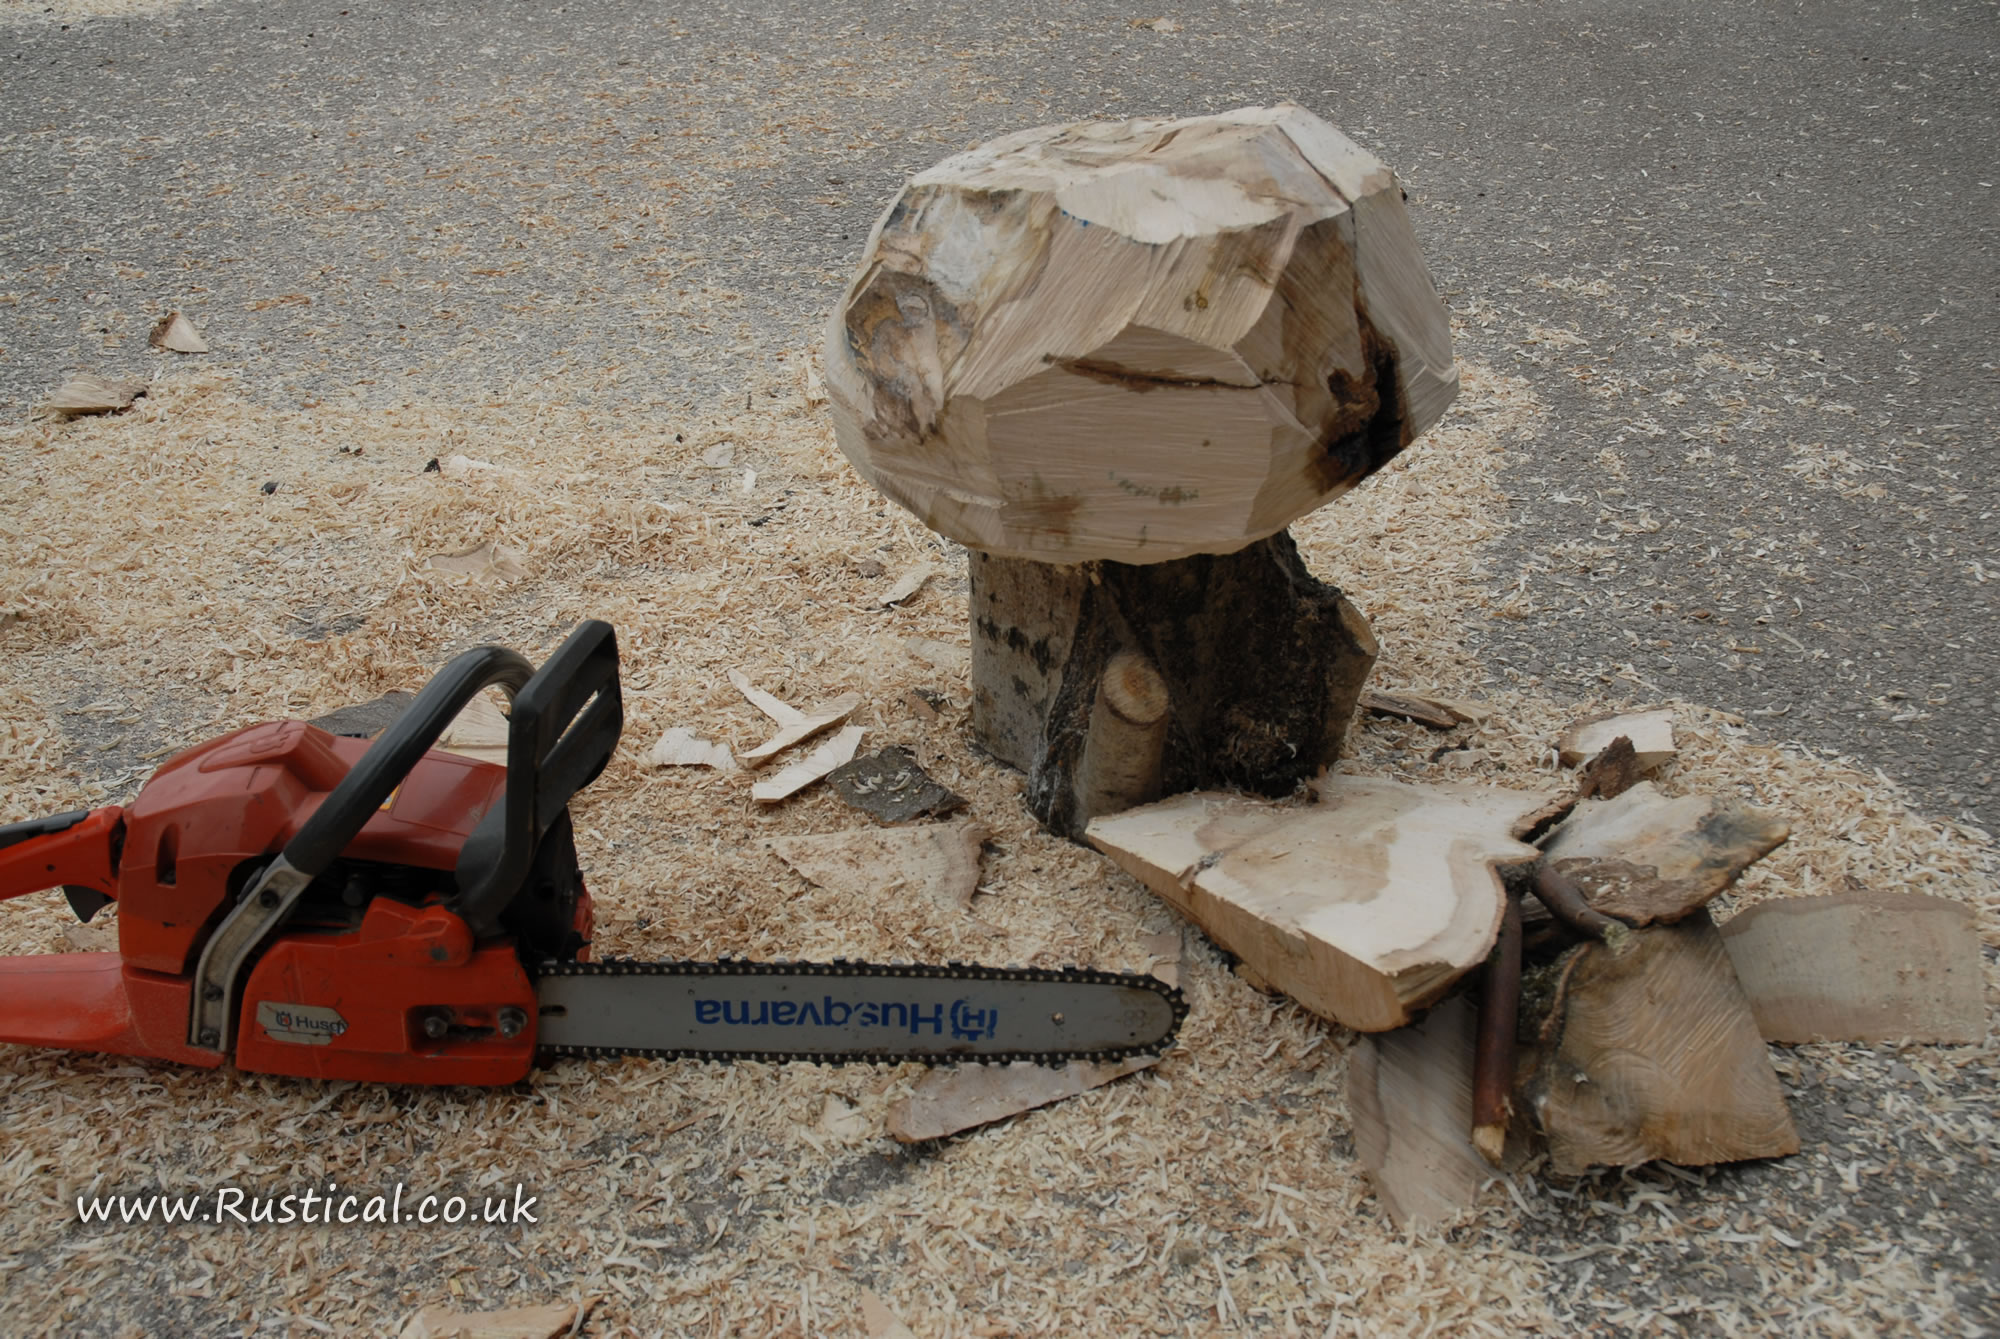 Roughing out the rough shape with a chainsaw